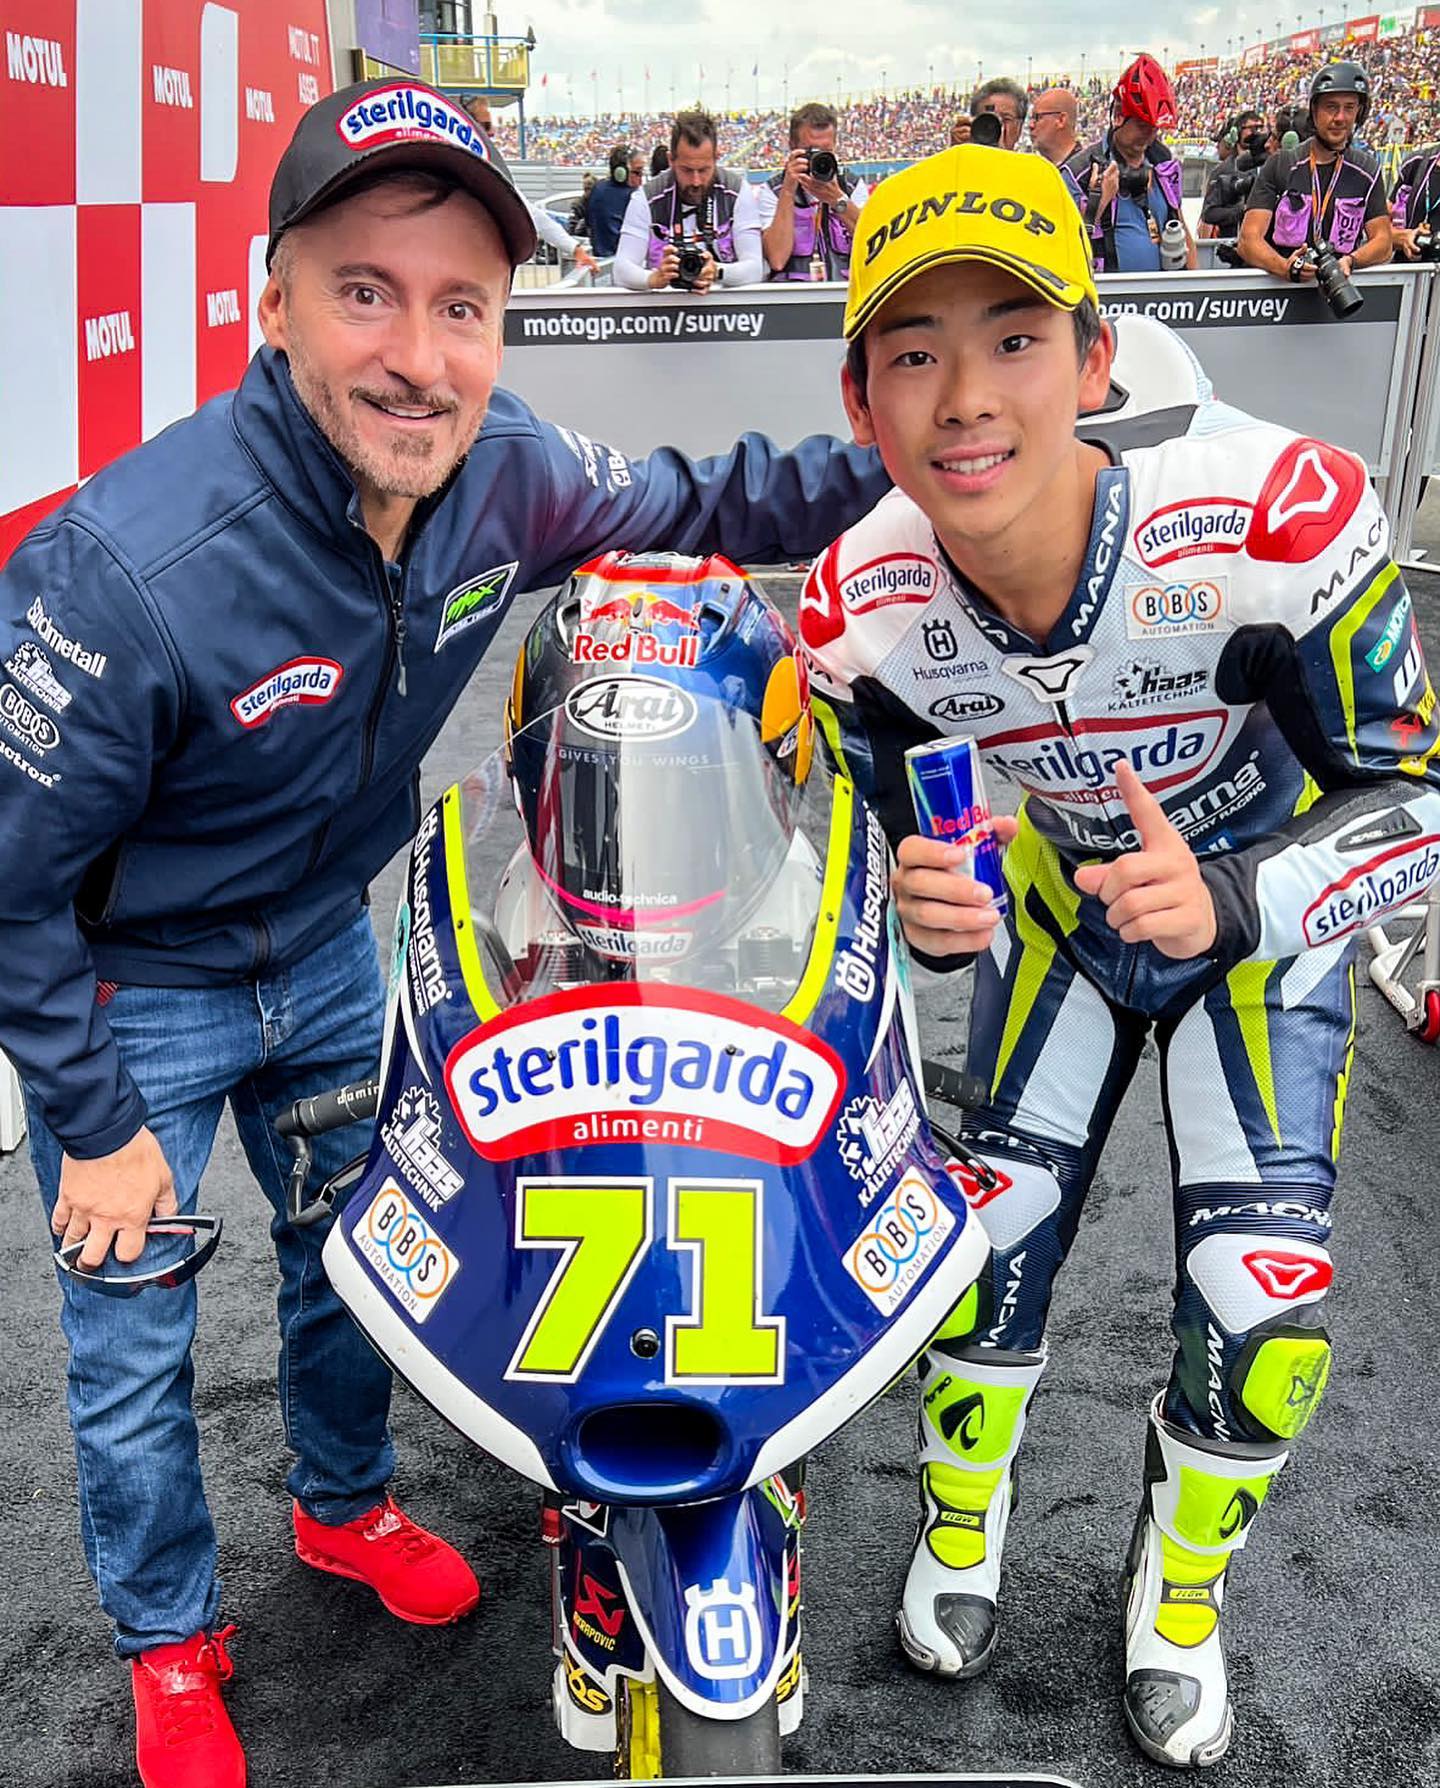 Featured image for “Moto3: Ayumu Sasaki Takes His First Victory In Moto3 At The Motul Assen TT.”